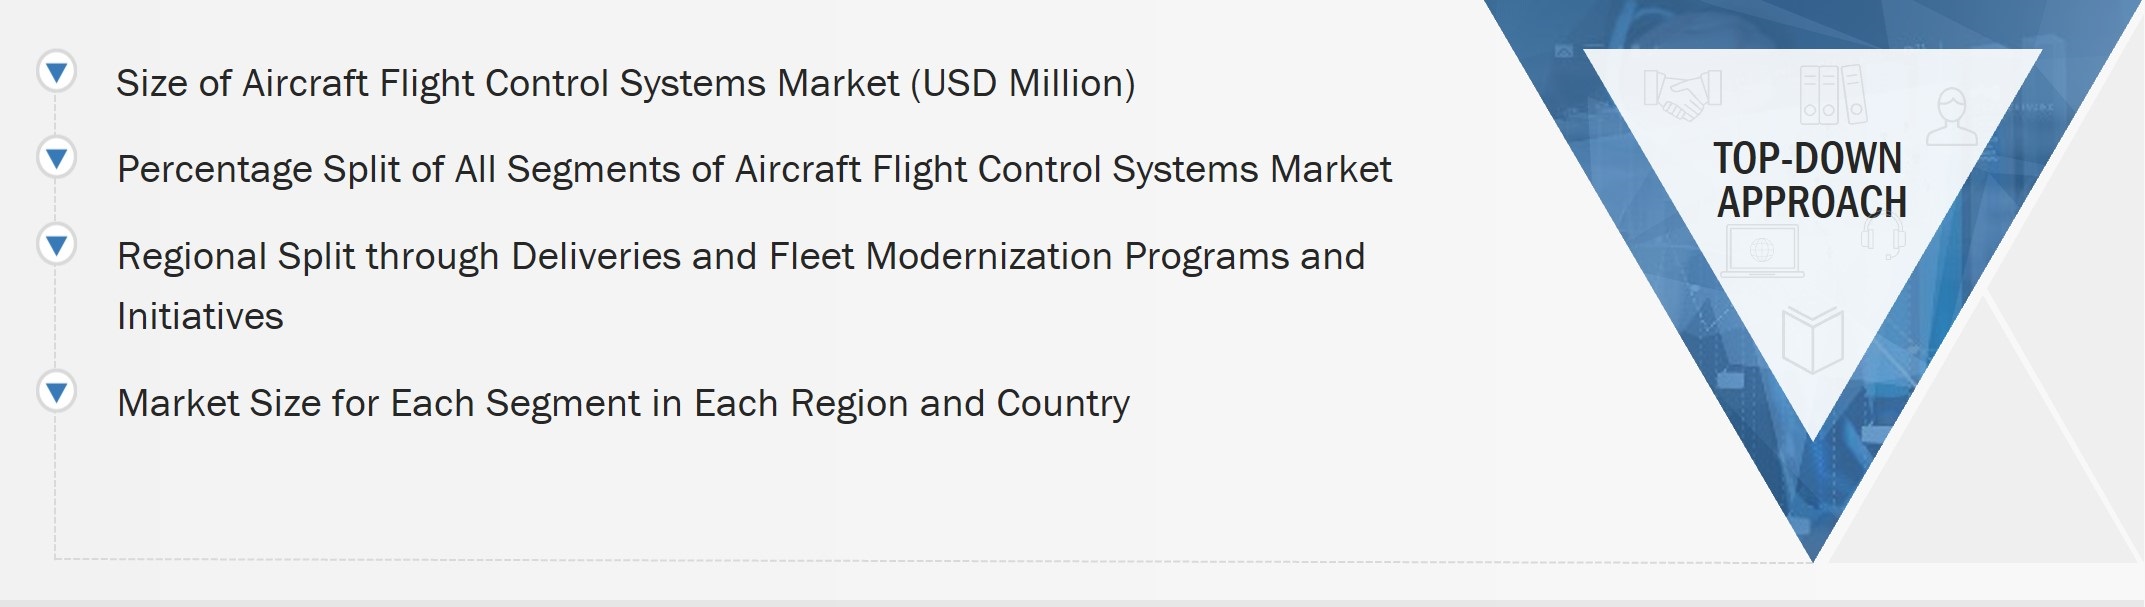 Aircraft Flight Control Systems Market Size, and Top-down approach 